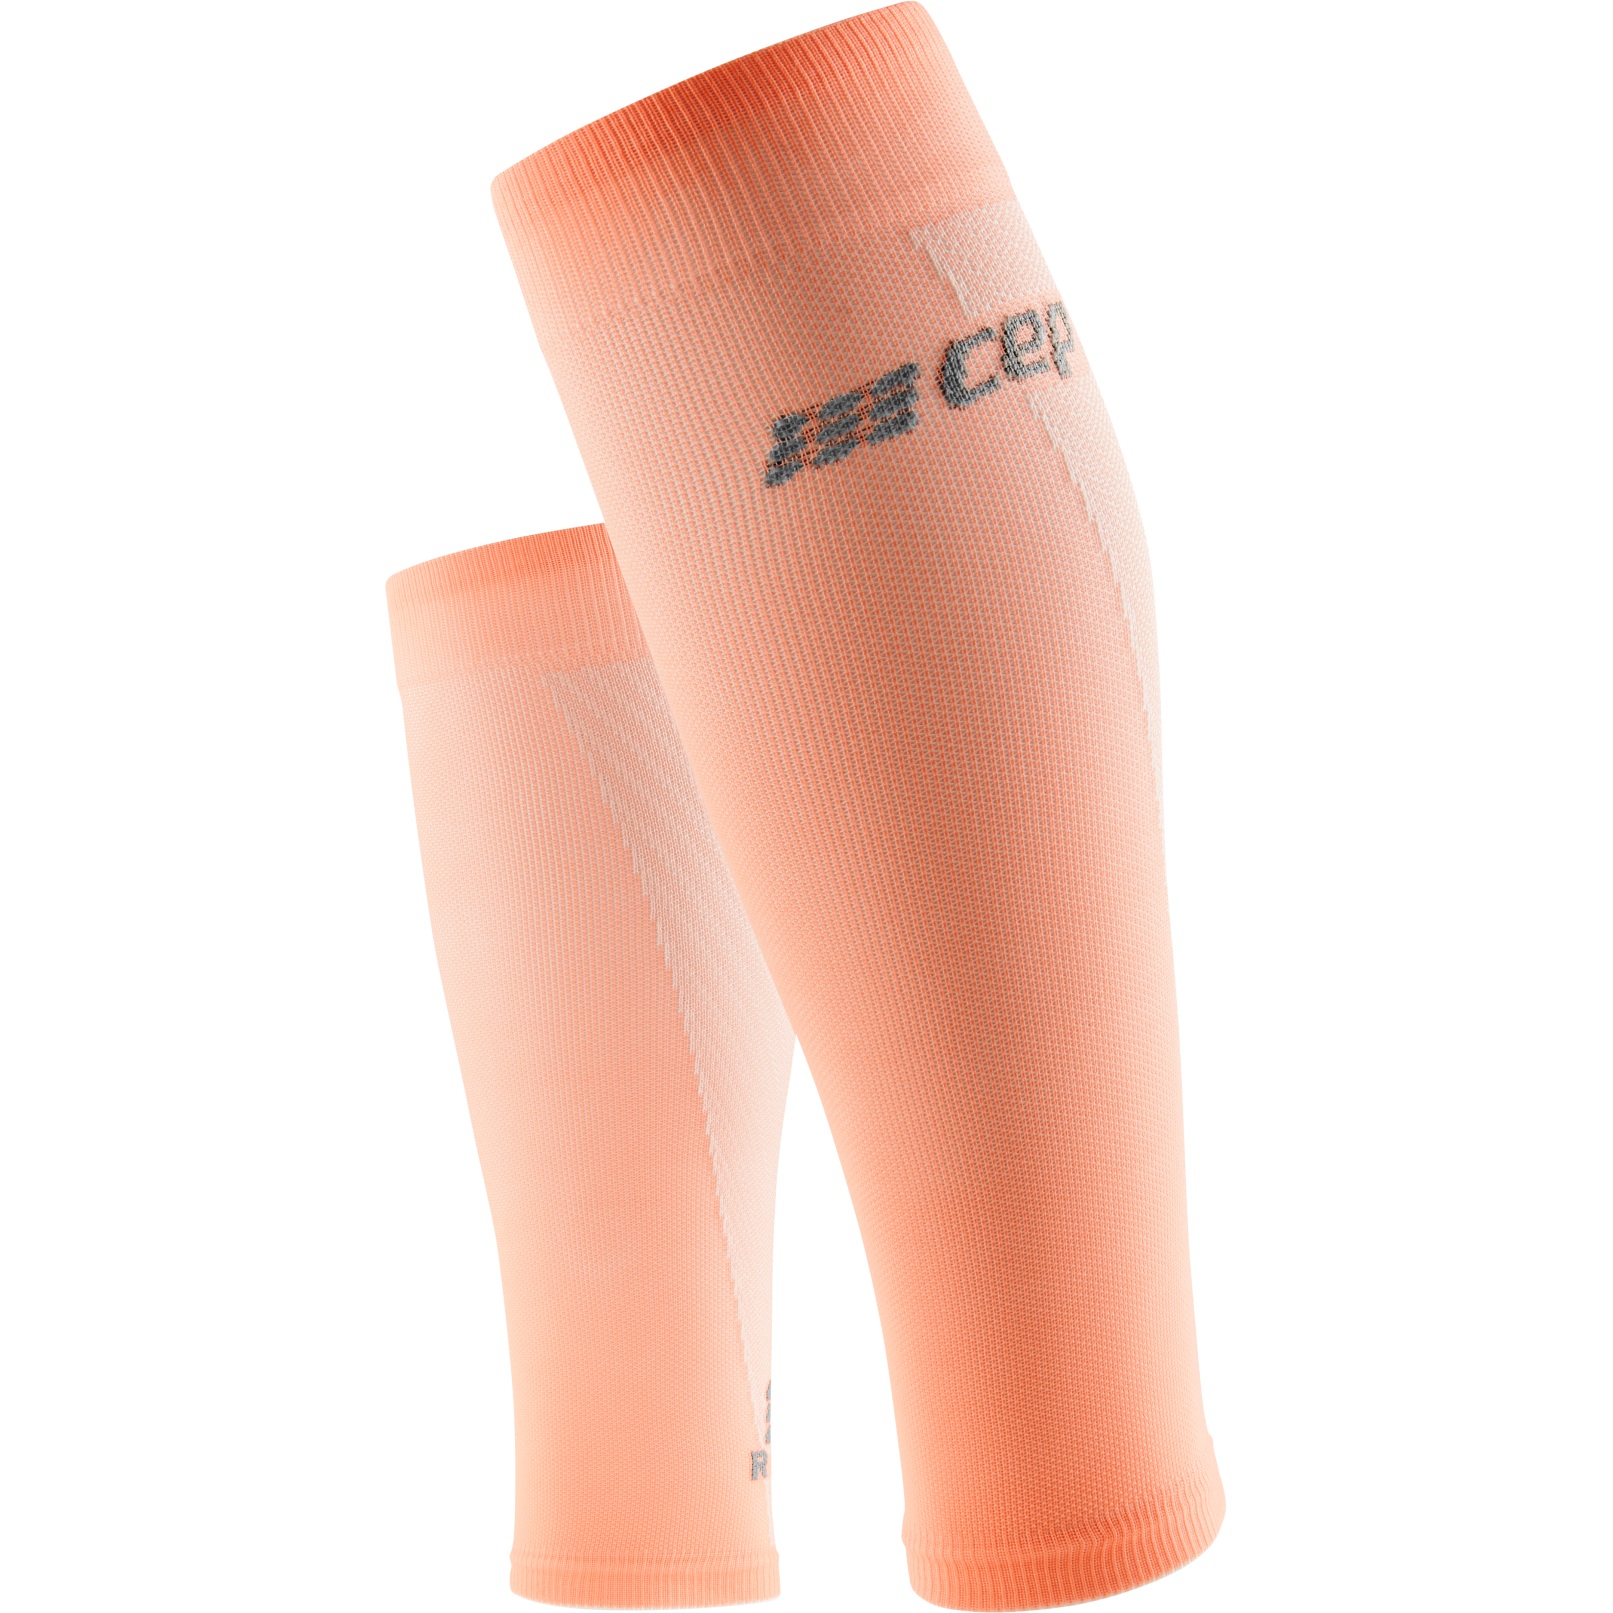 Picture of CEP Ultralight Compression Calf Sleeves V3 Women - coral/cream